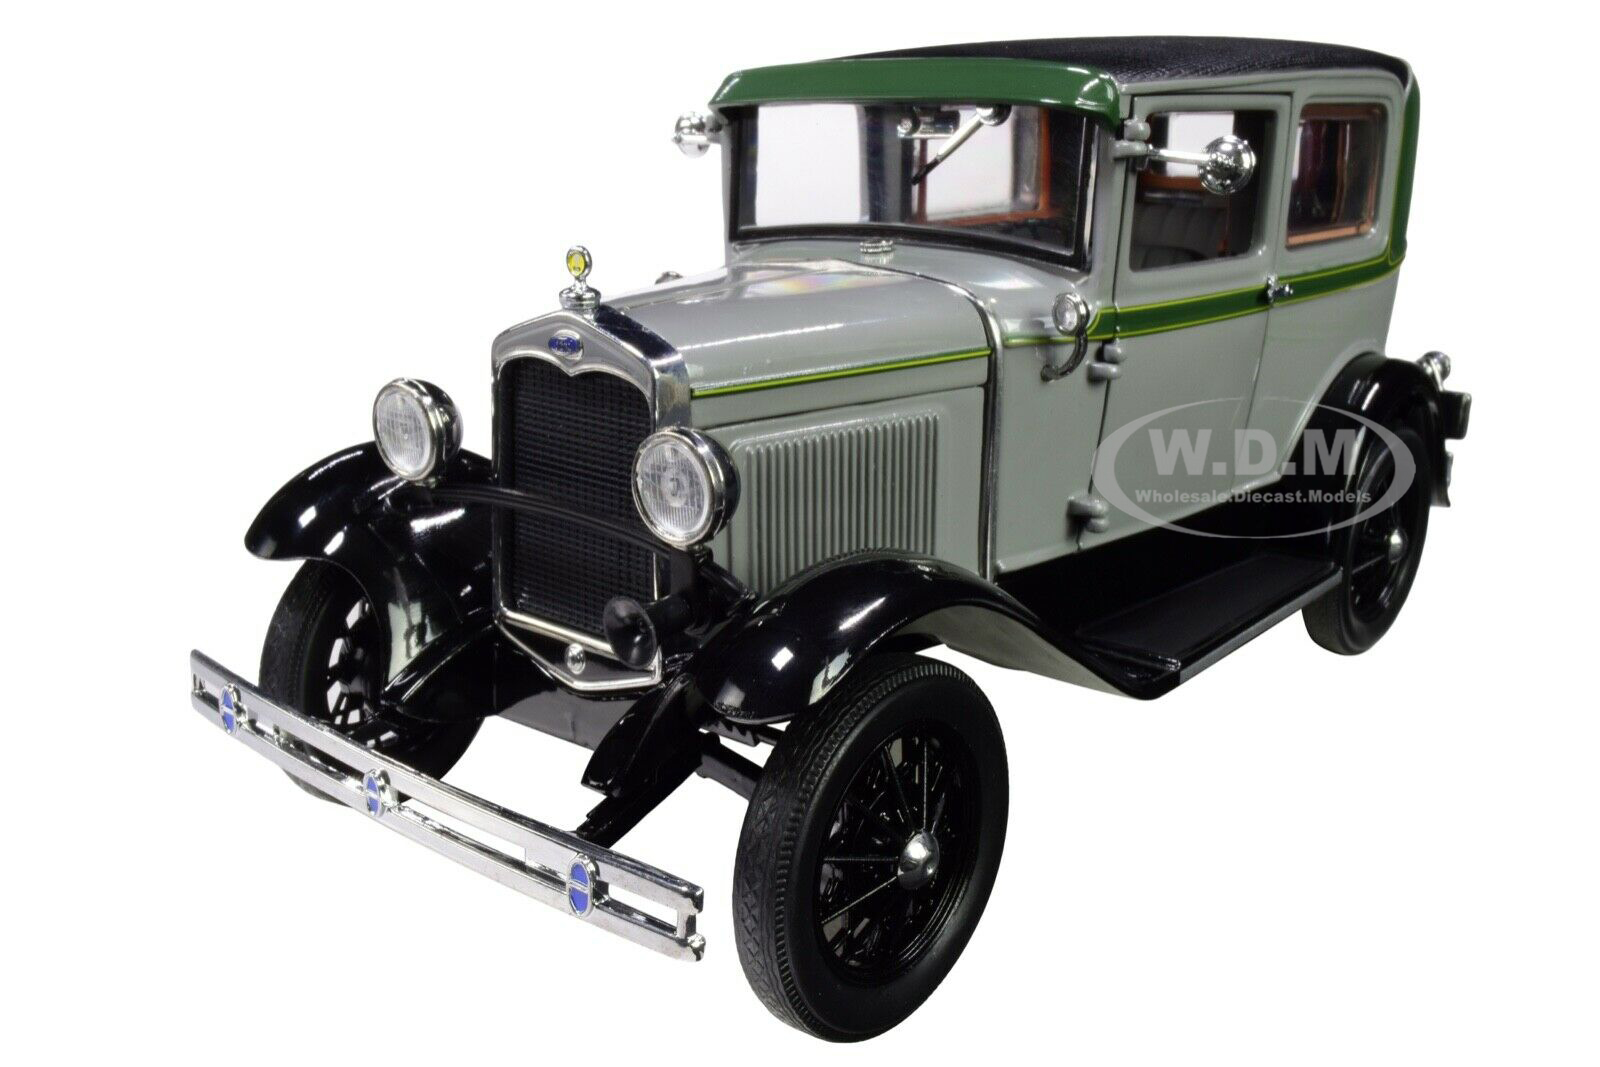 1931 Ford Model A Tudor Dawn Gray And Green With Black Top 1/18 Diecast Model Car By Sunstar